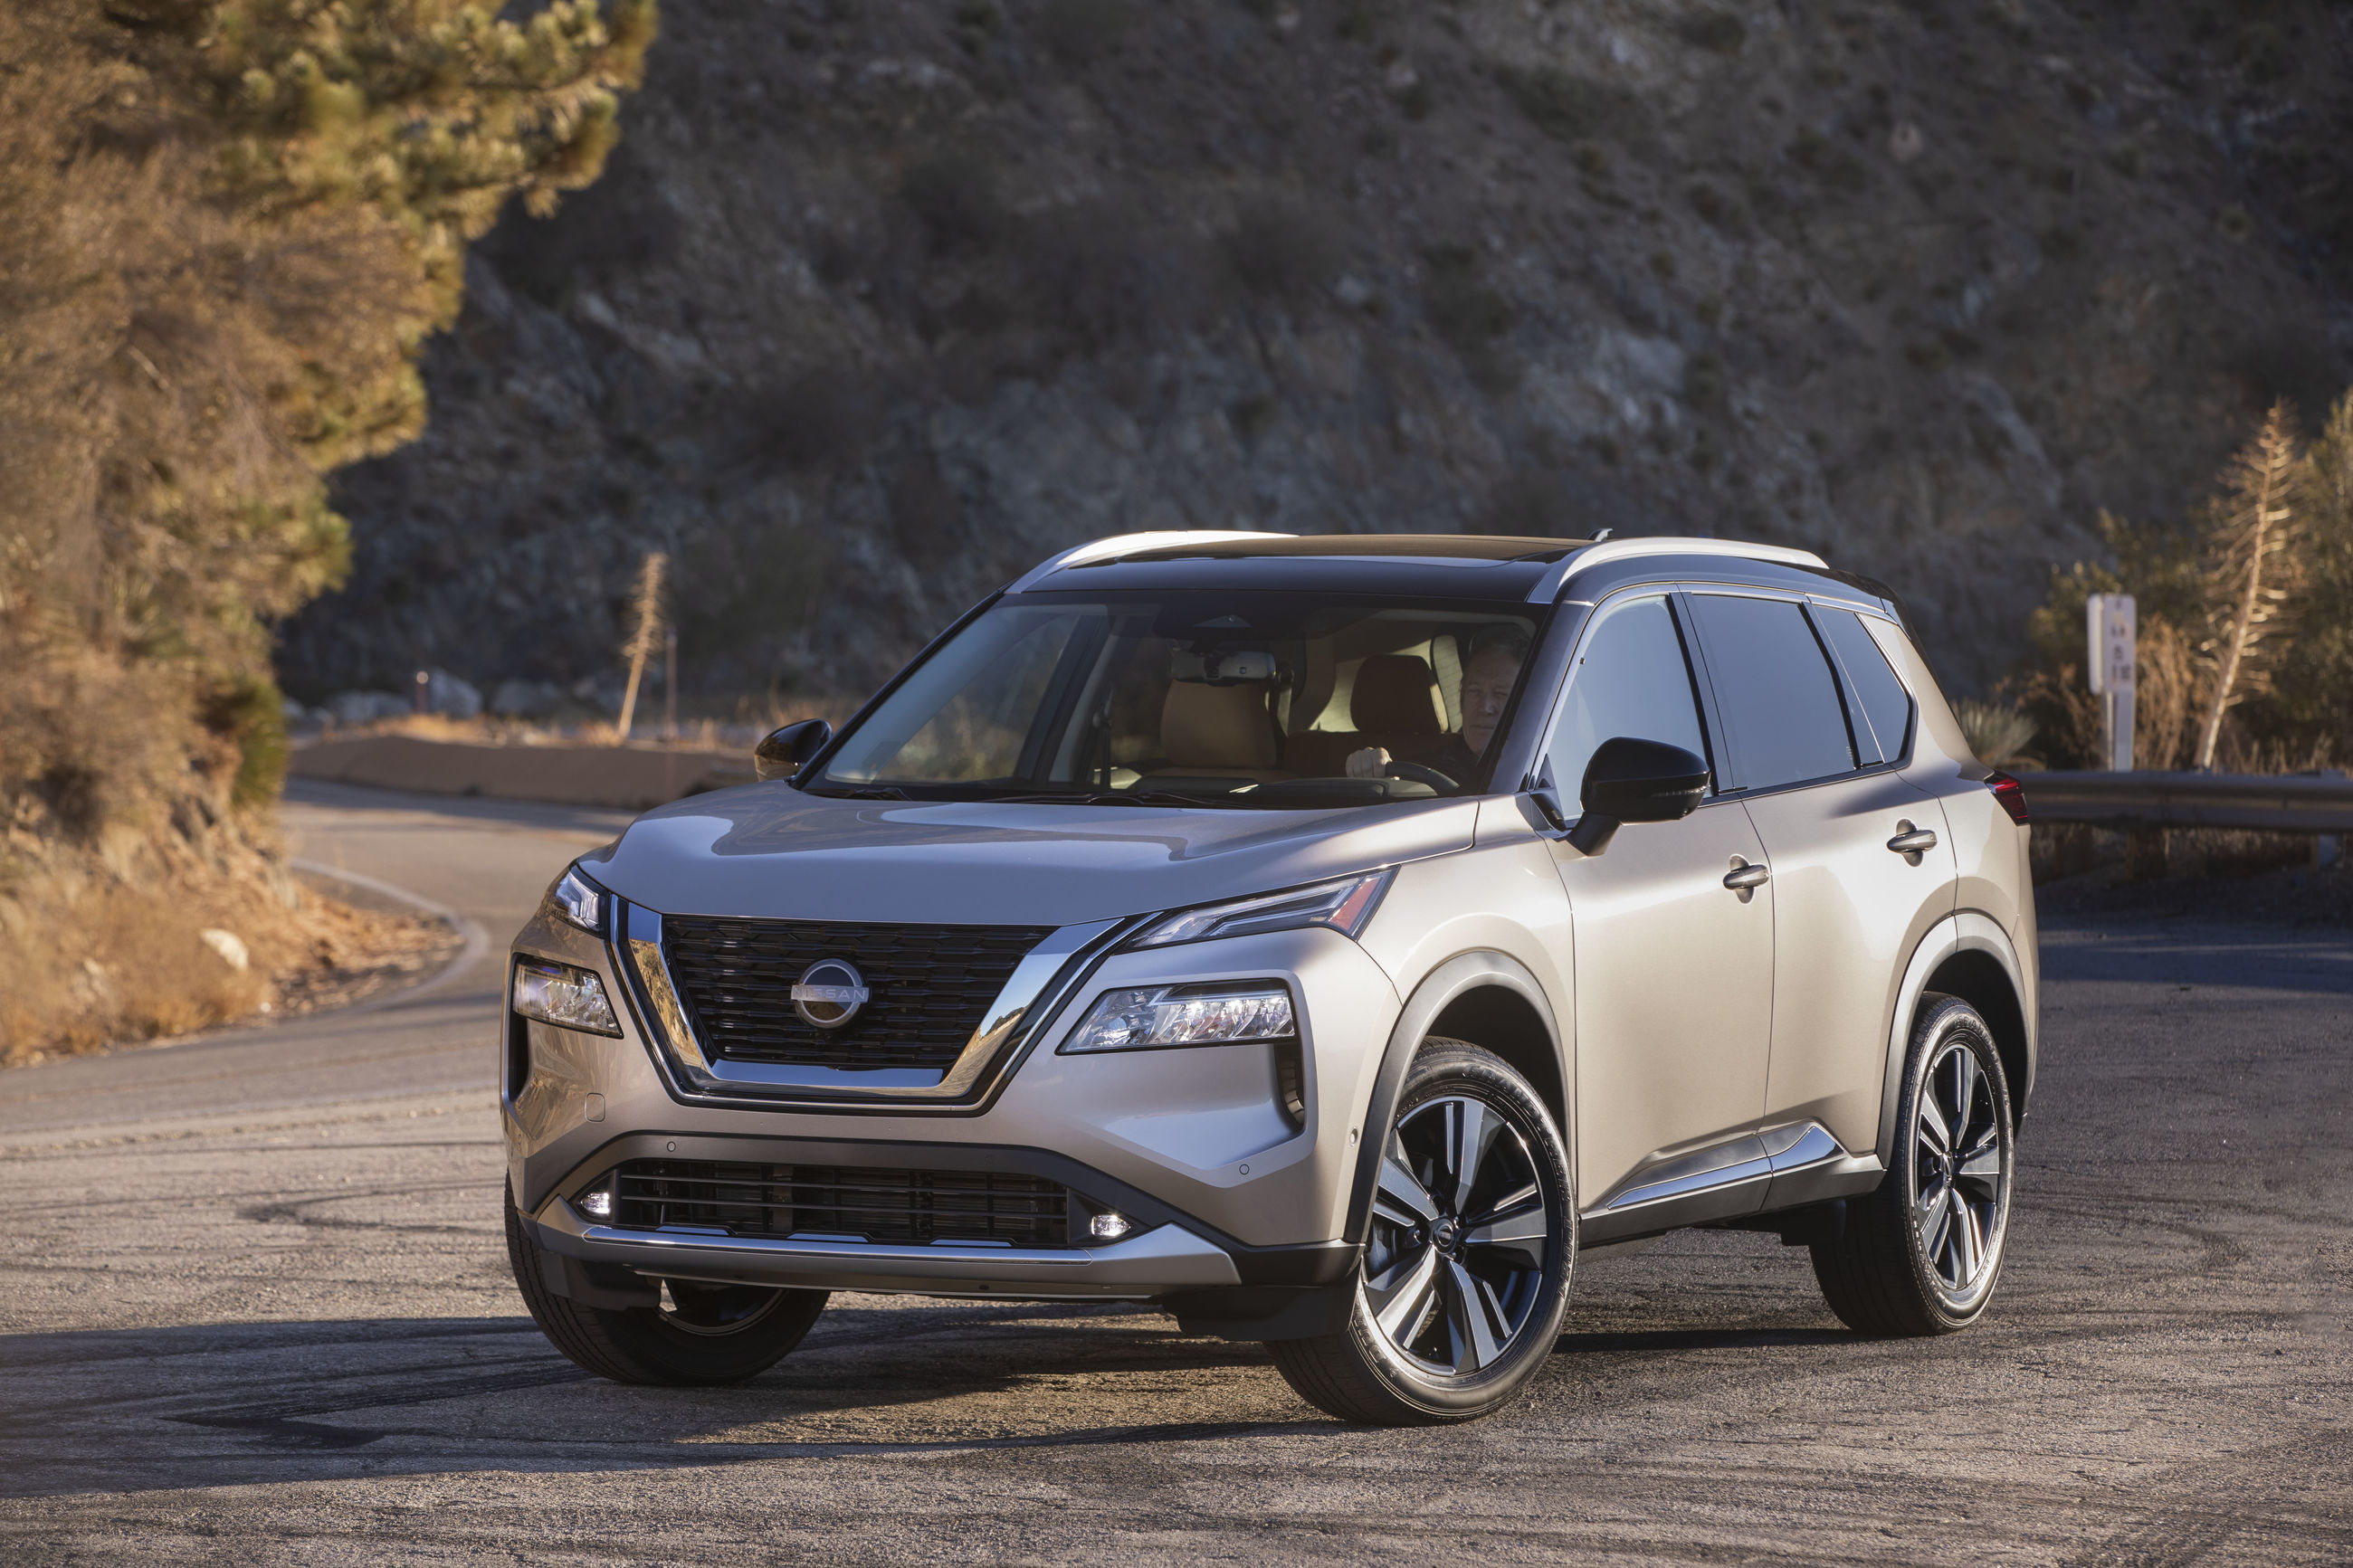 The 2022 Nissan Rogue Gets A More Powerful Turbo Engine And Better Fuel Economy